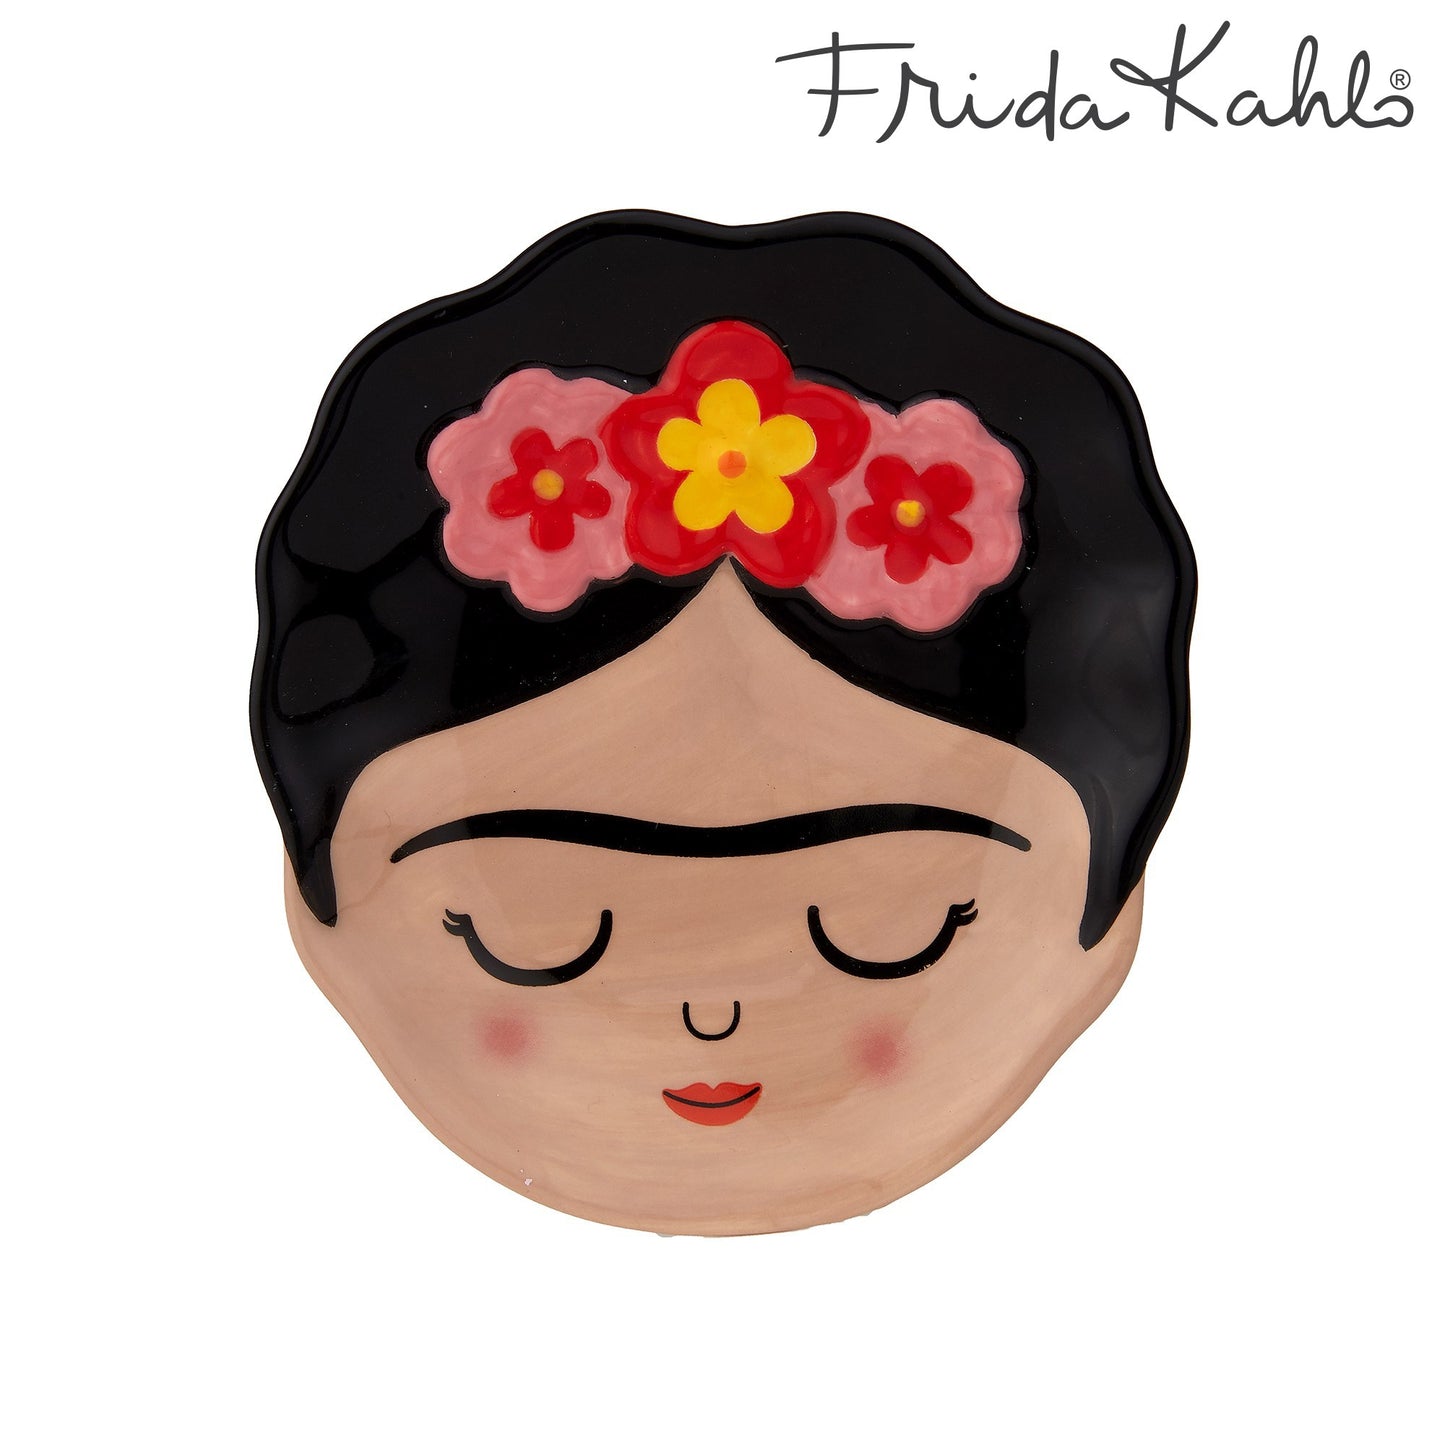 Pretty trinket dish featuring Frida Kahlo and reflecting the vibrant culture of Mexico.